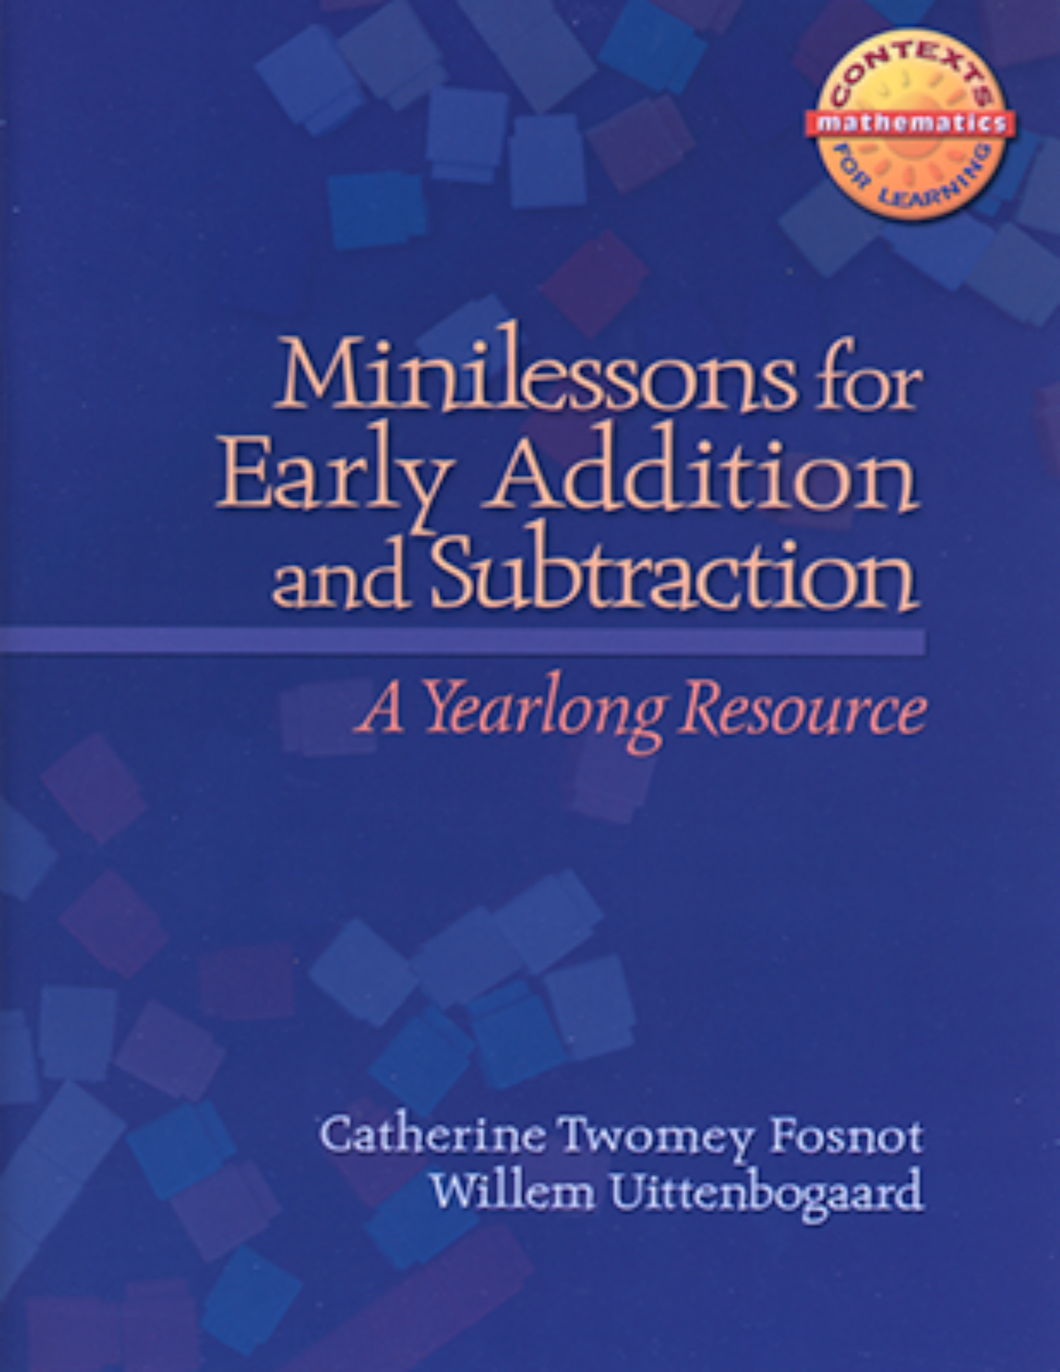 Minilessons for Early Number Sense, Addition, and Subtraction (2nd Grade)